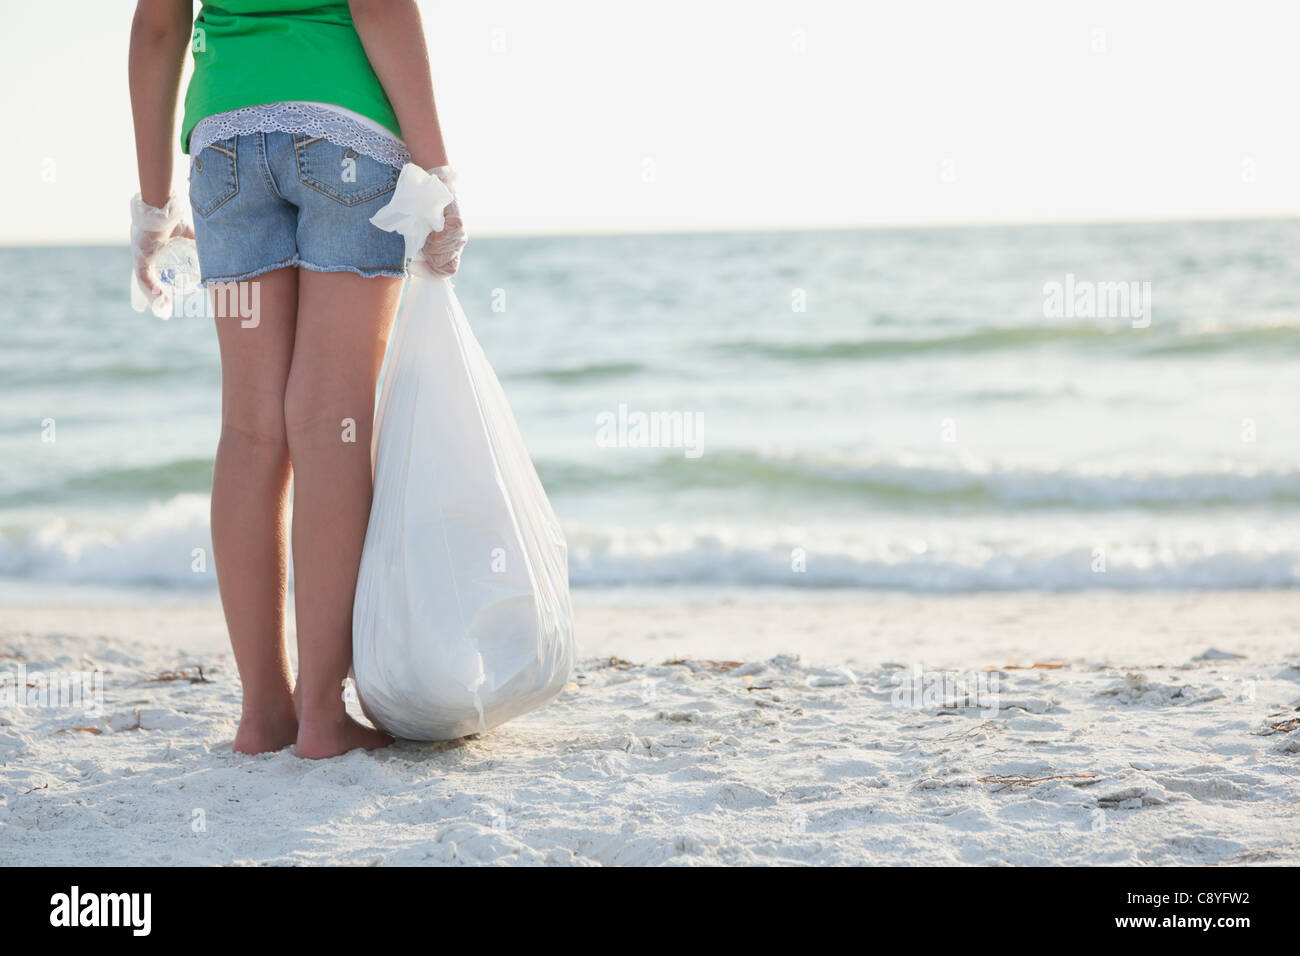 USA, Florida, St. Petersburg, Rear view of girl (10-11) standing on beach with garbage bag, facing ocean Stock Photo